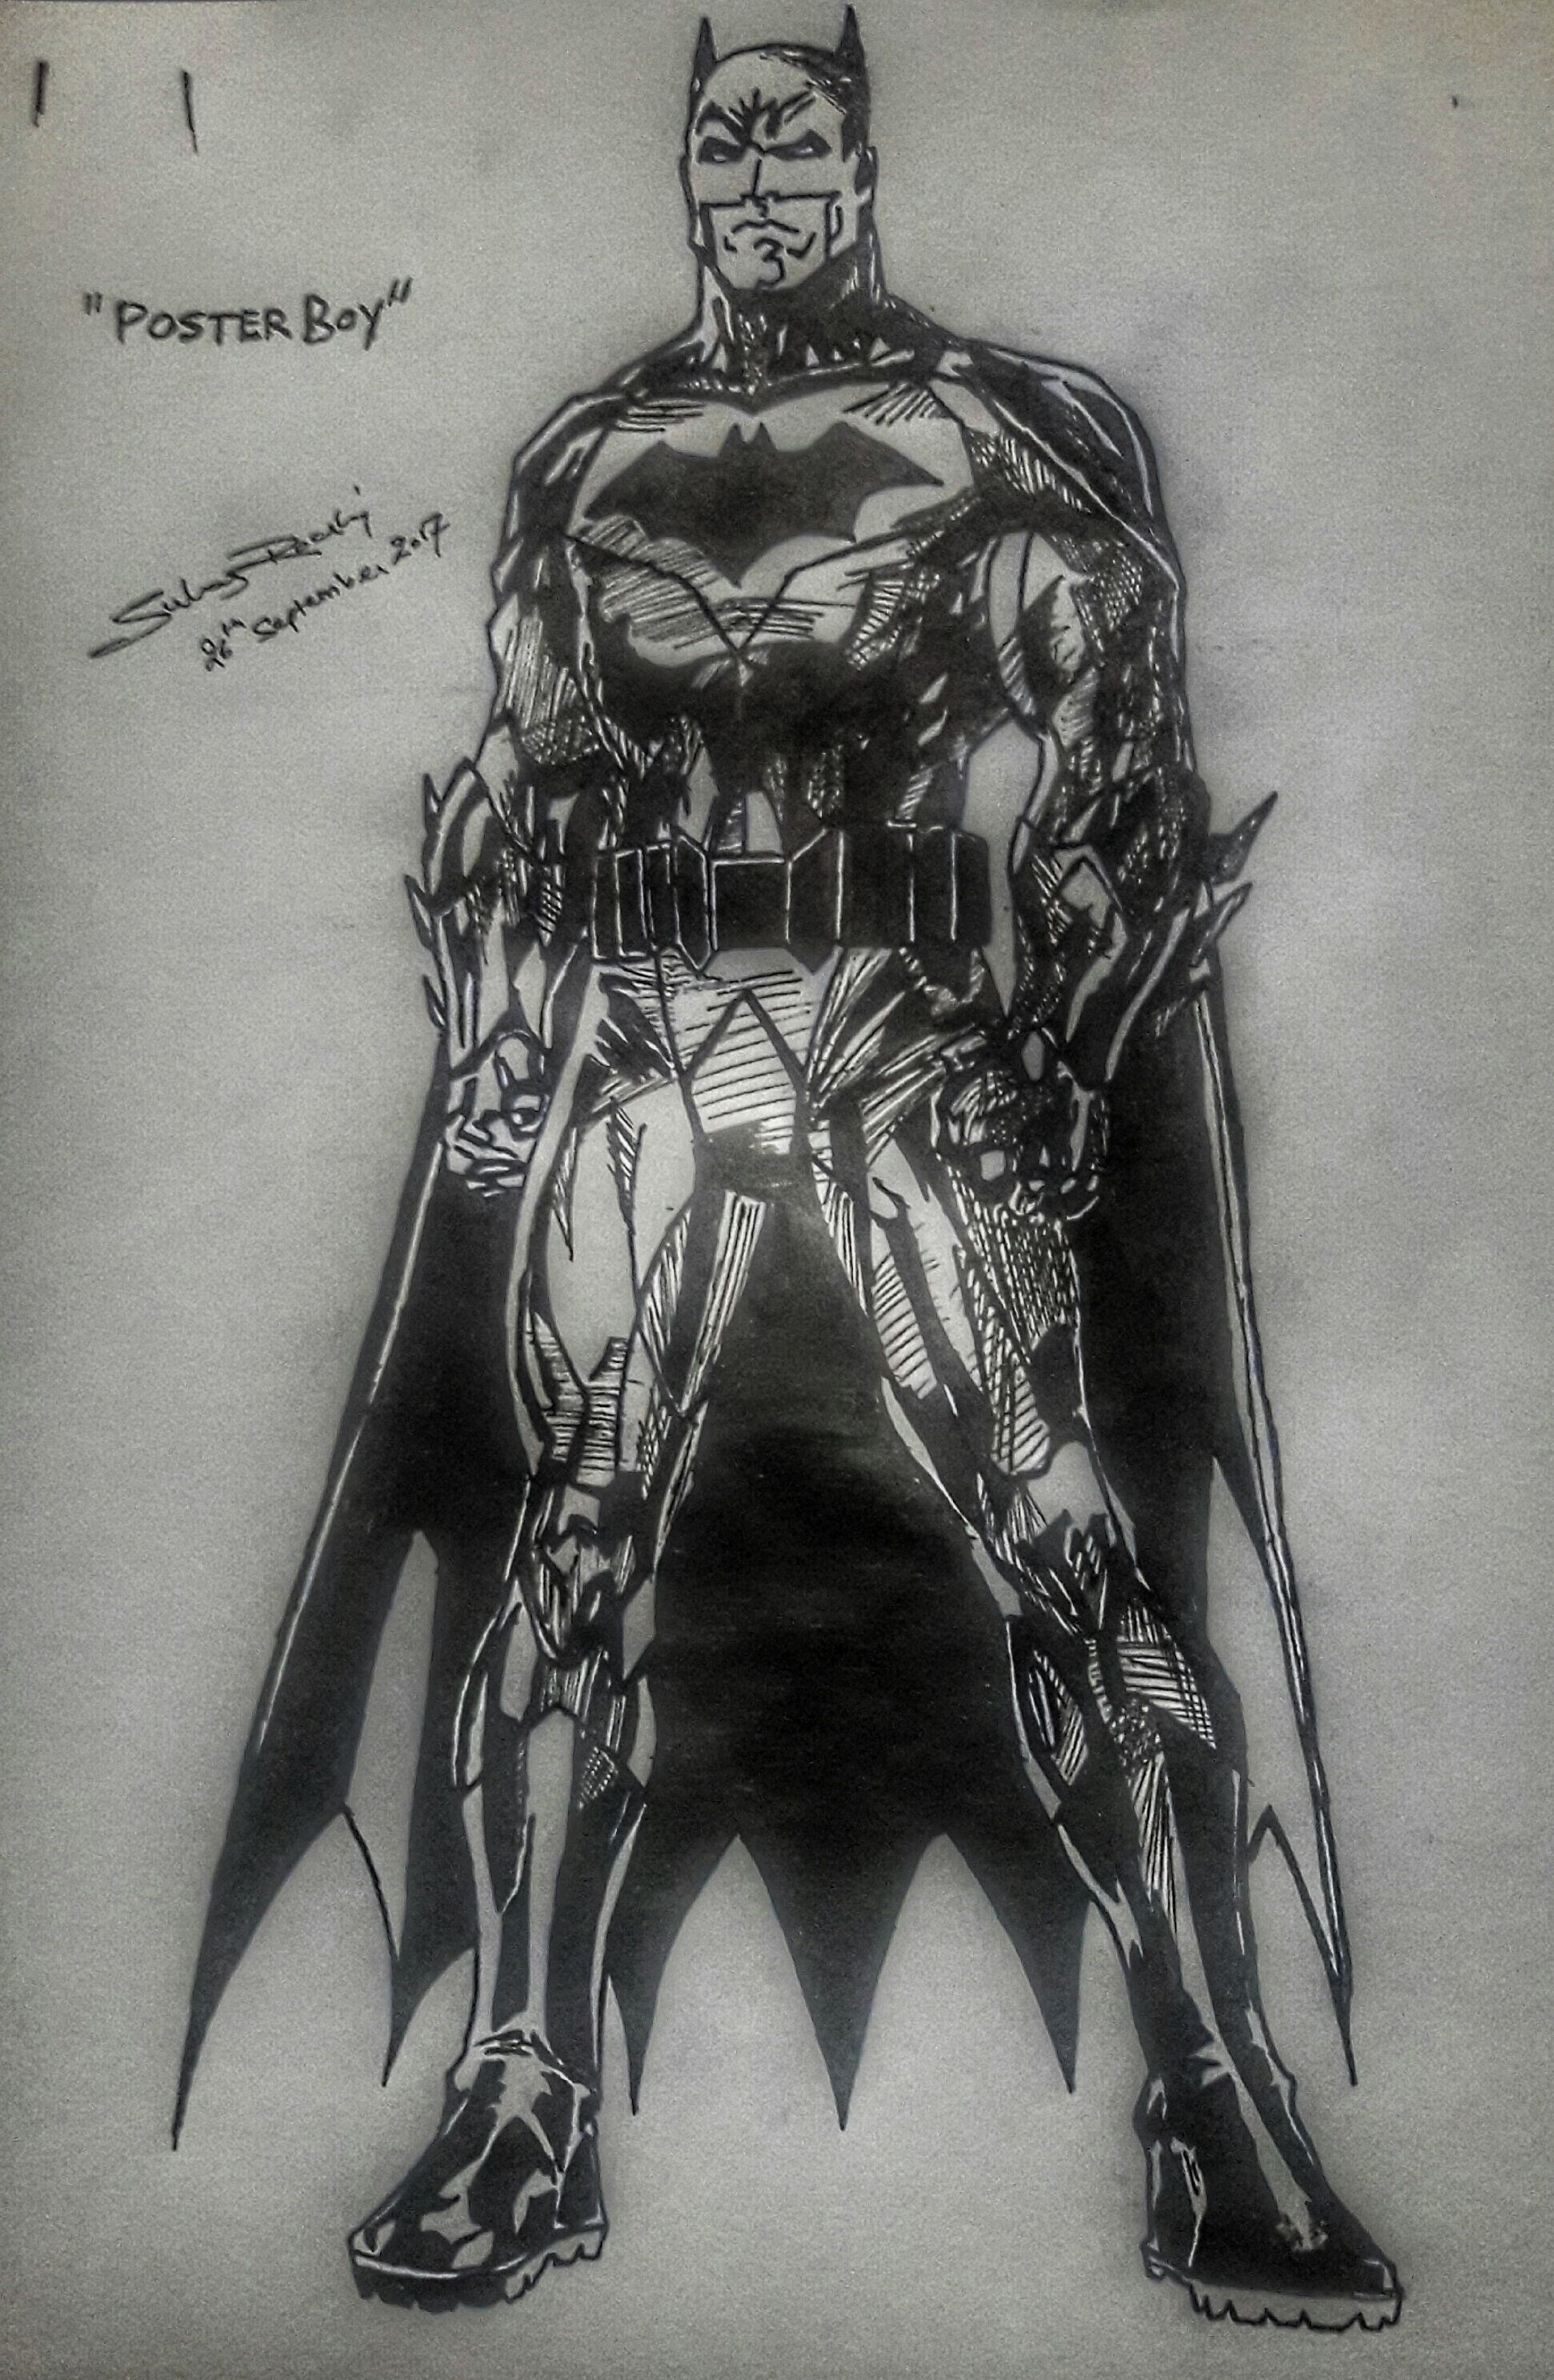 Im super excited for The Batman movie so I decided to draw this poster  inspired by one of my favorite covers by Jason Fabok I hope you like it   VicBazaine on